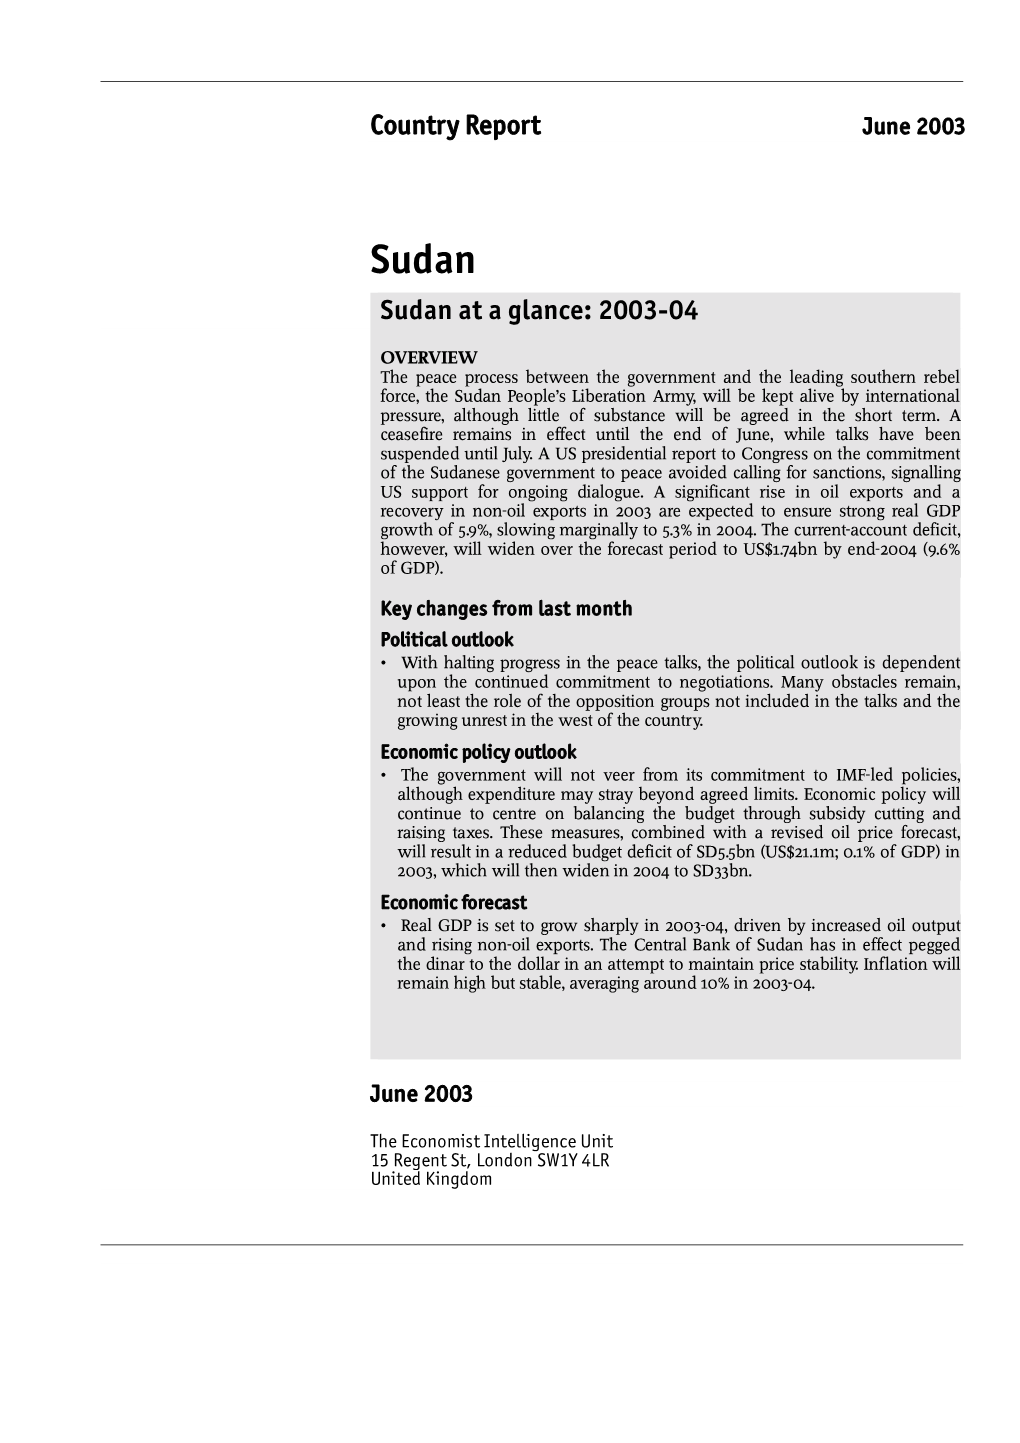 Country Report Sudan at a Glance: 2003-04